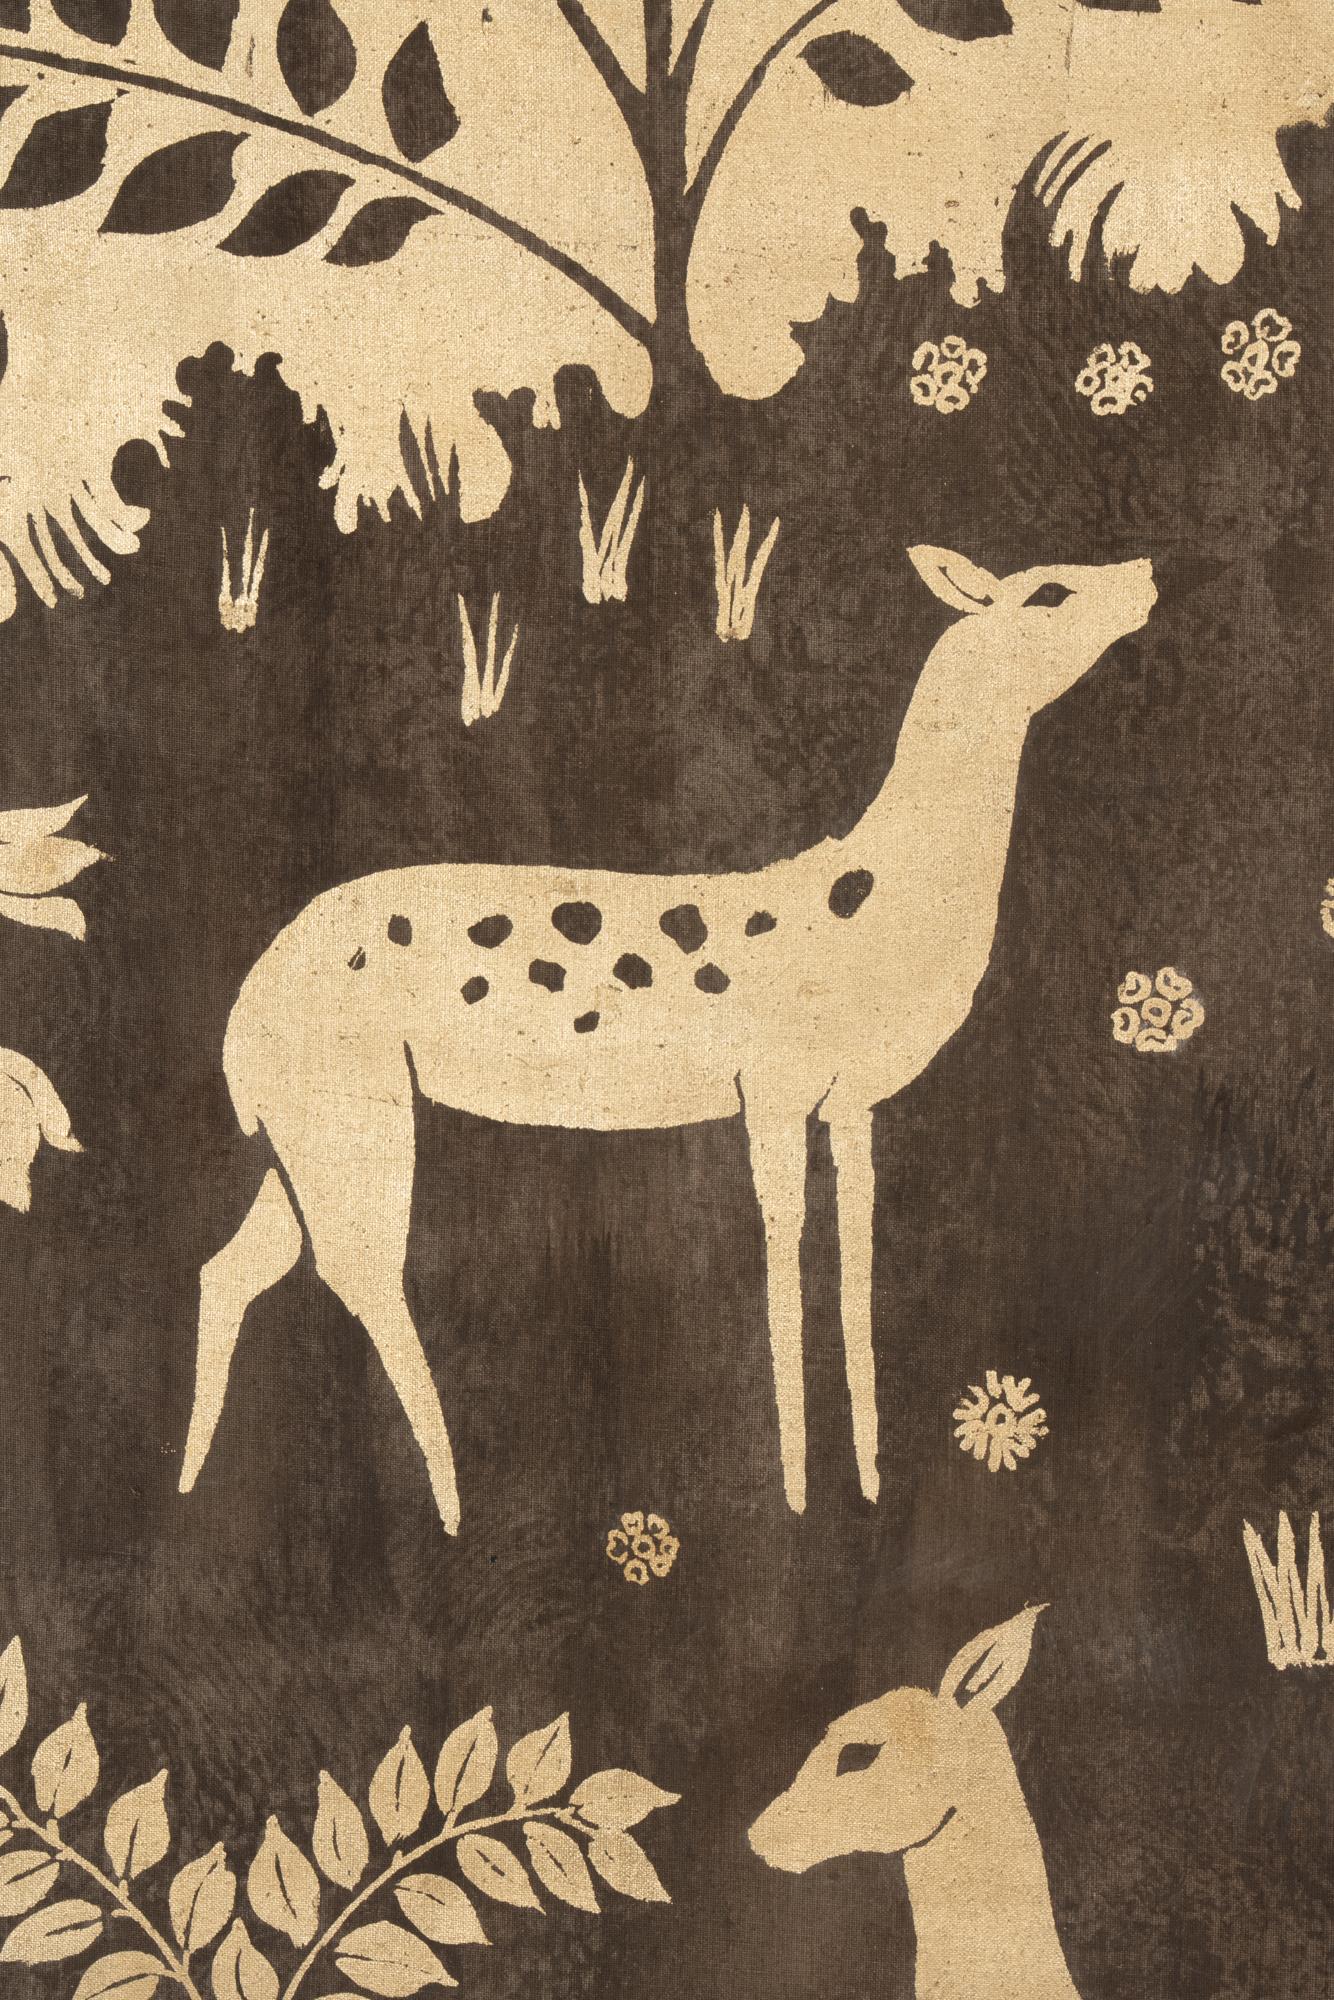 Painted linen canvas representing two golden deer on a golden floral background.

Contemporary French work.